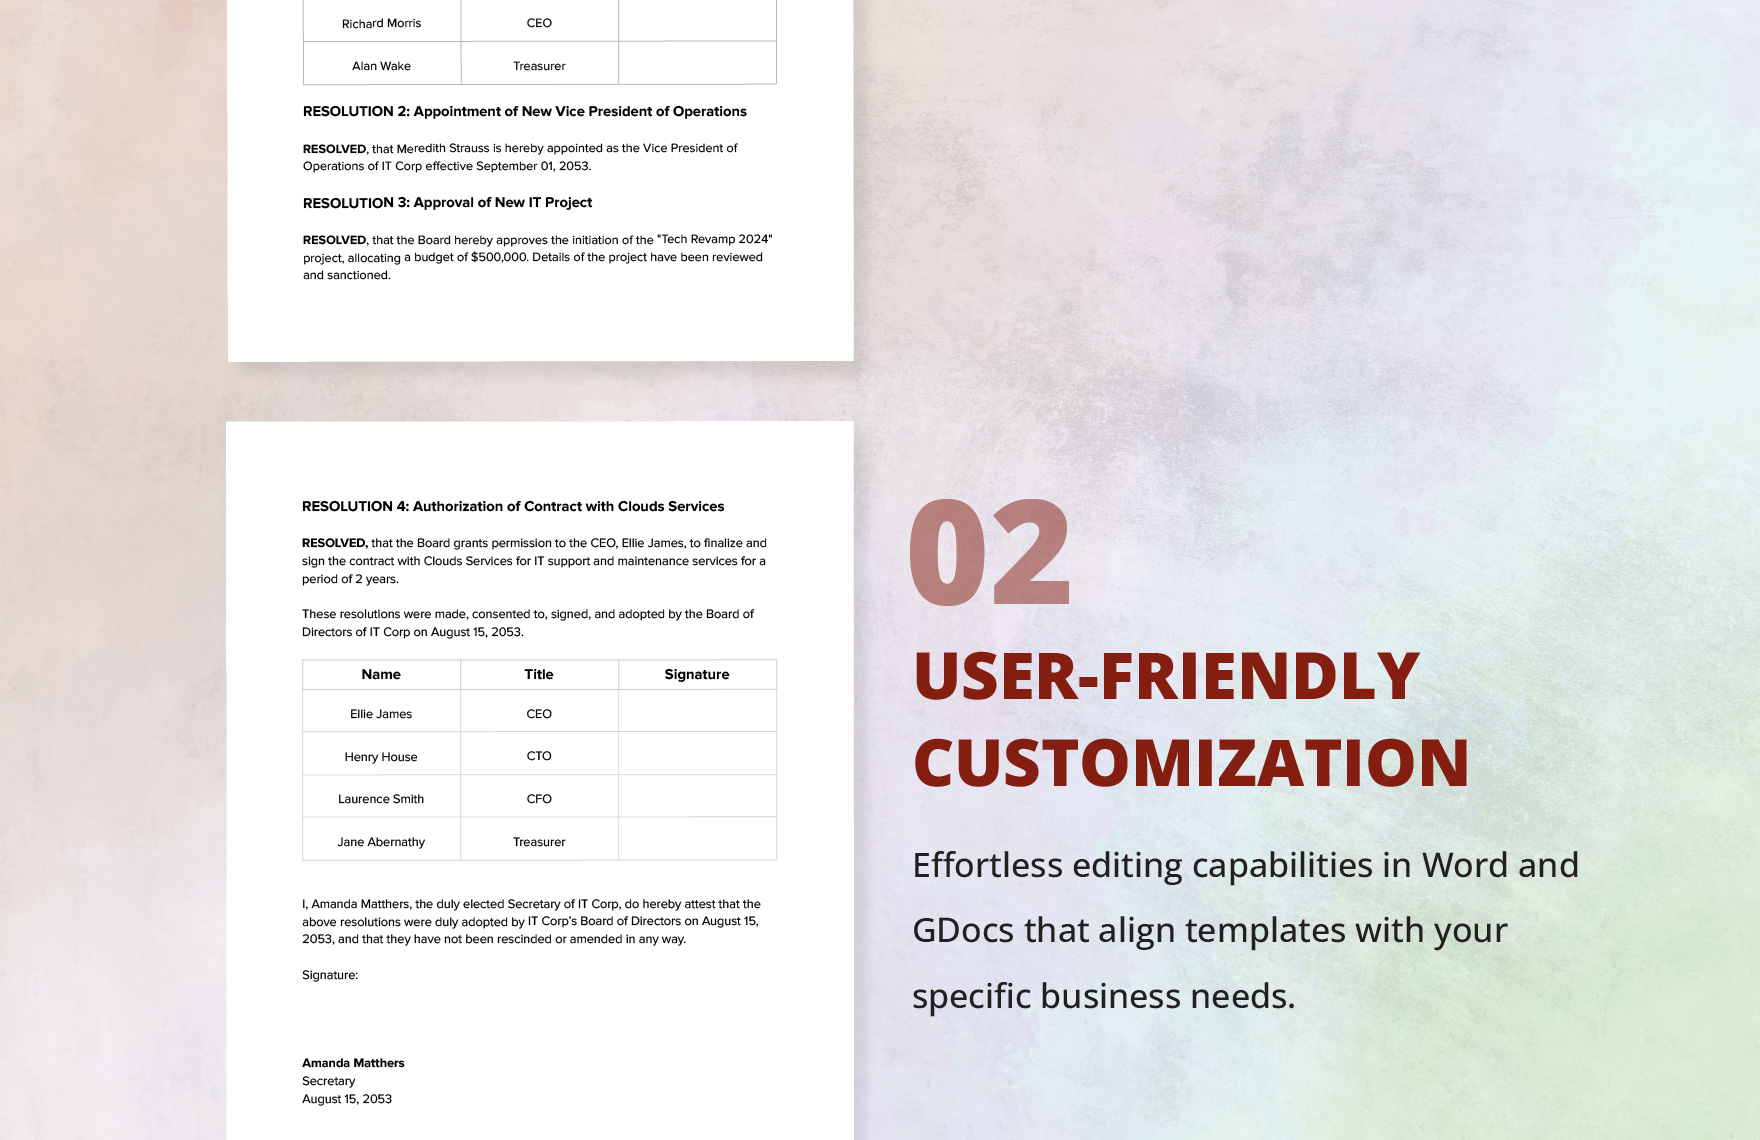 IT Corporate Resolution Form Template